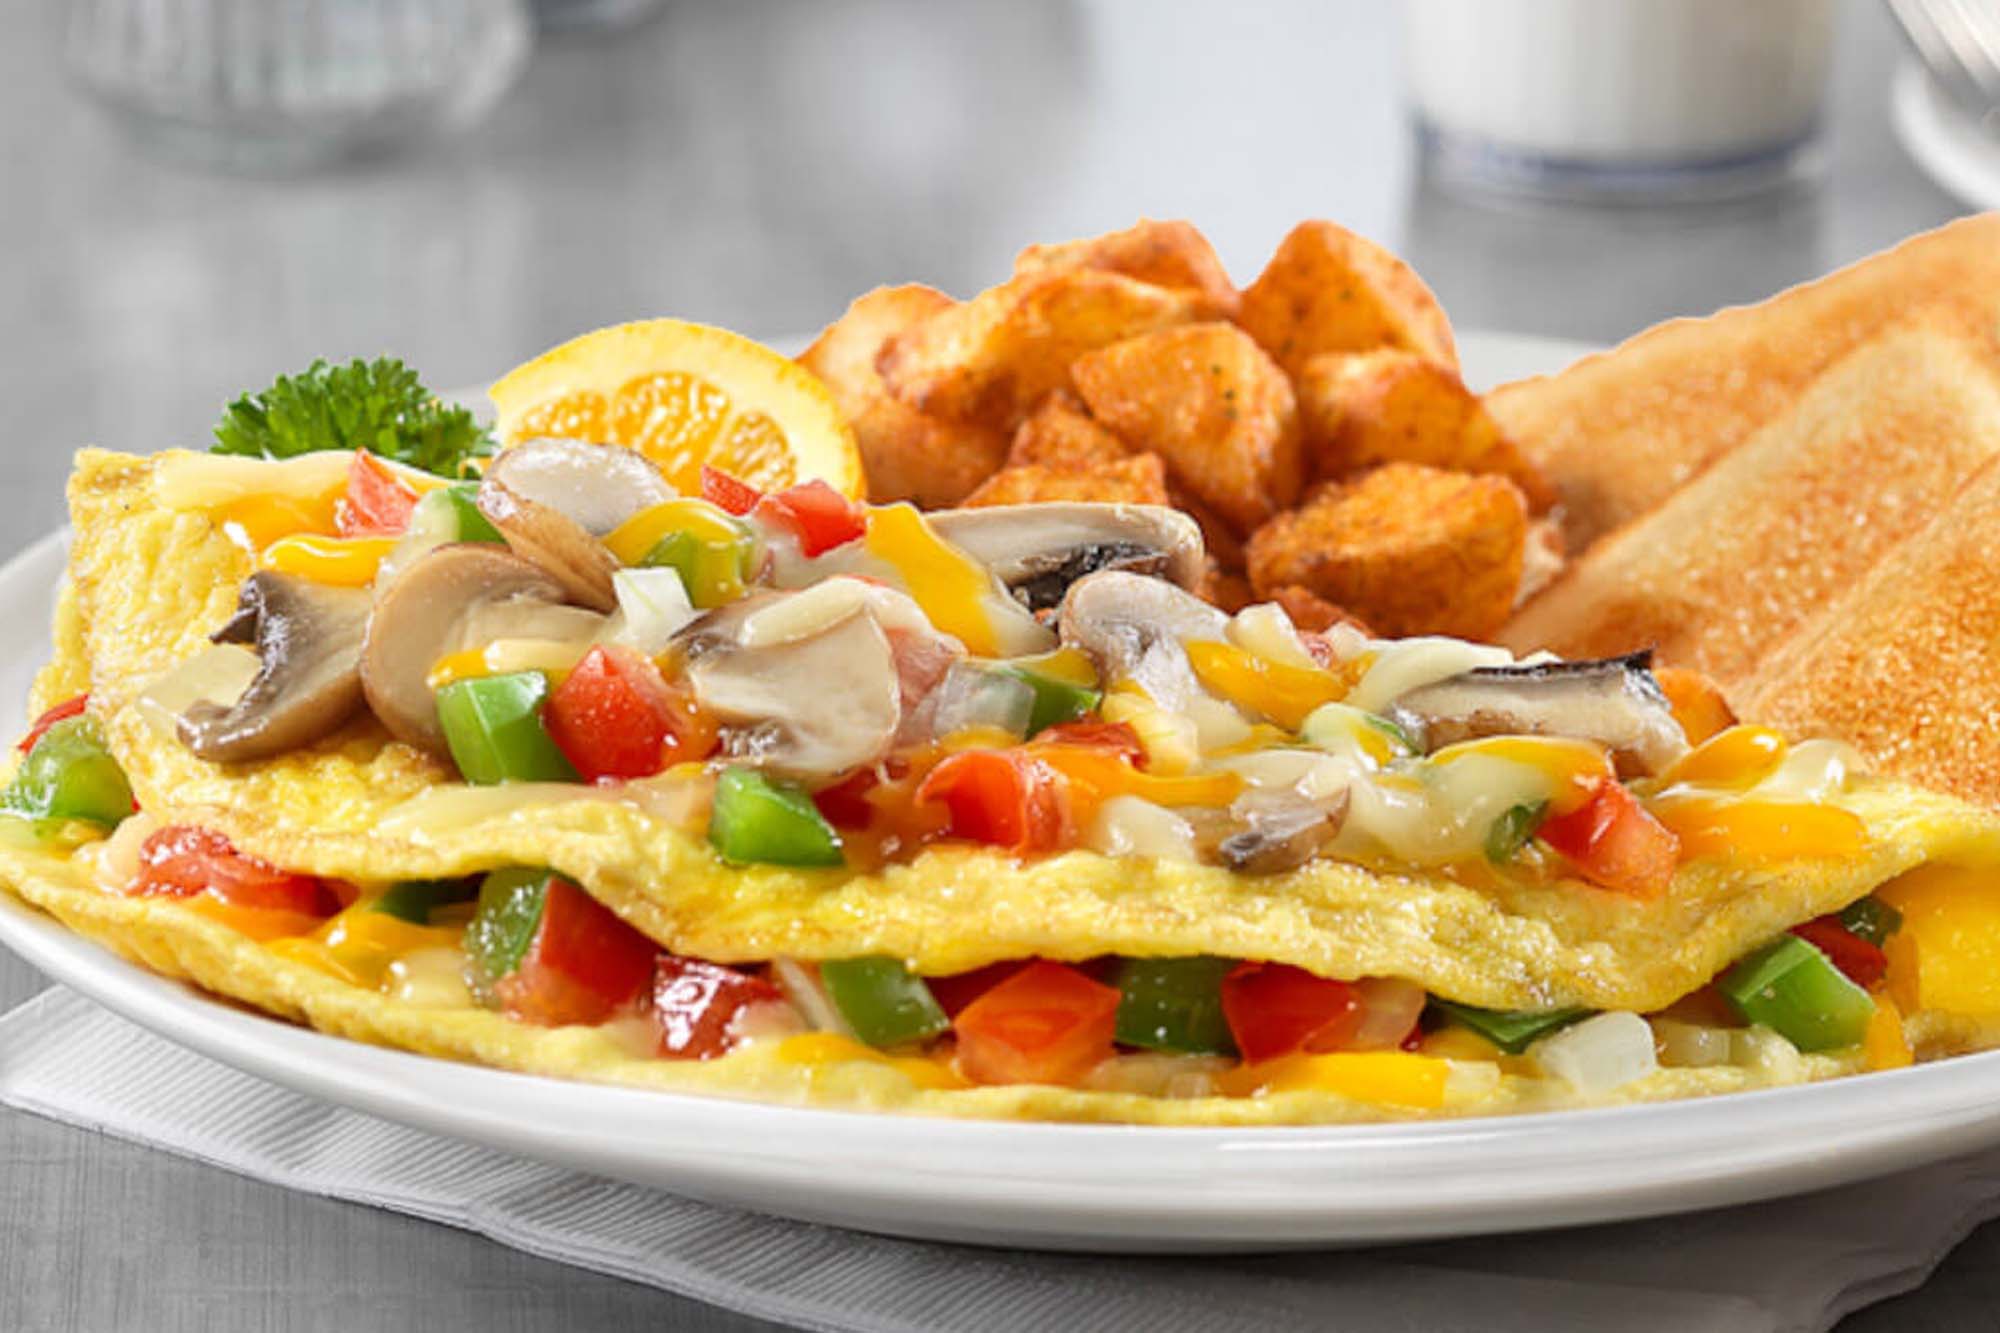 picture of an omellette with peppers, mushrooms and cheese.